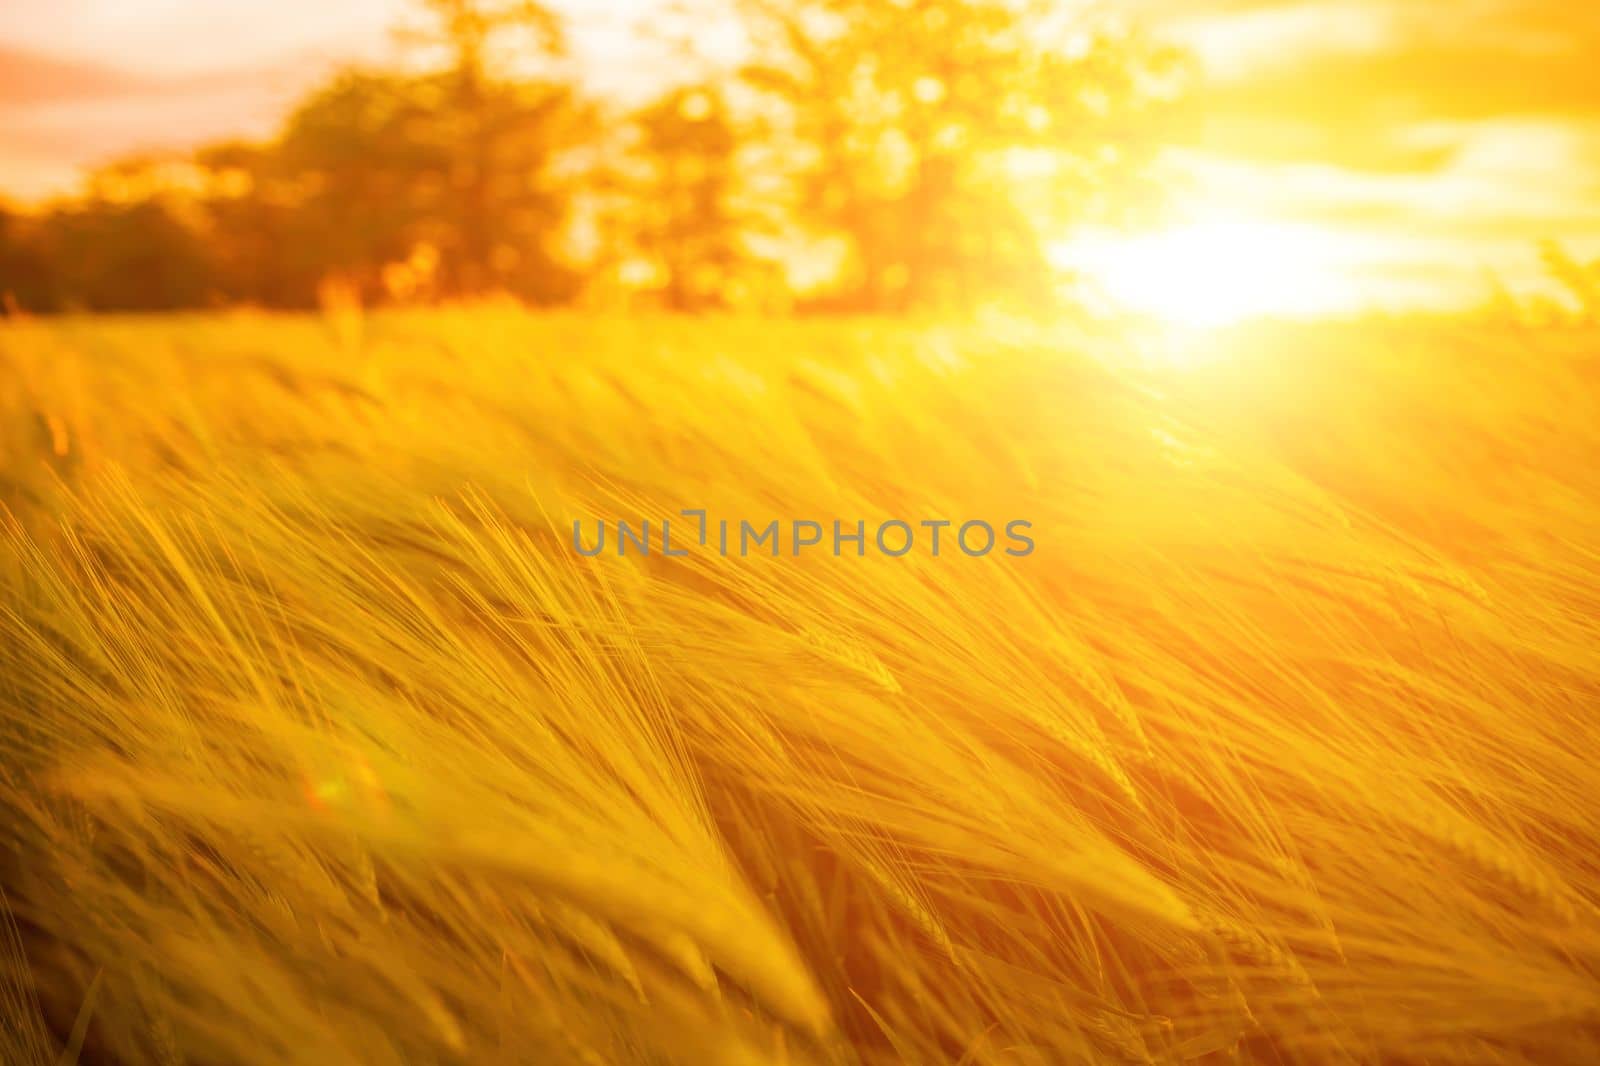 Abstract defocused green wheat field in countryside. Field of wheat blowing in the wind at sunset. Young and green spikelets. Ears of barley crop in nature. Agronomy and food production by panophotograph